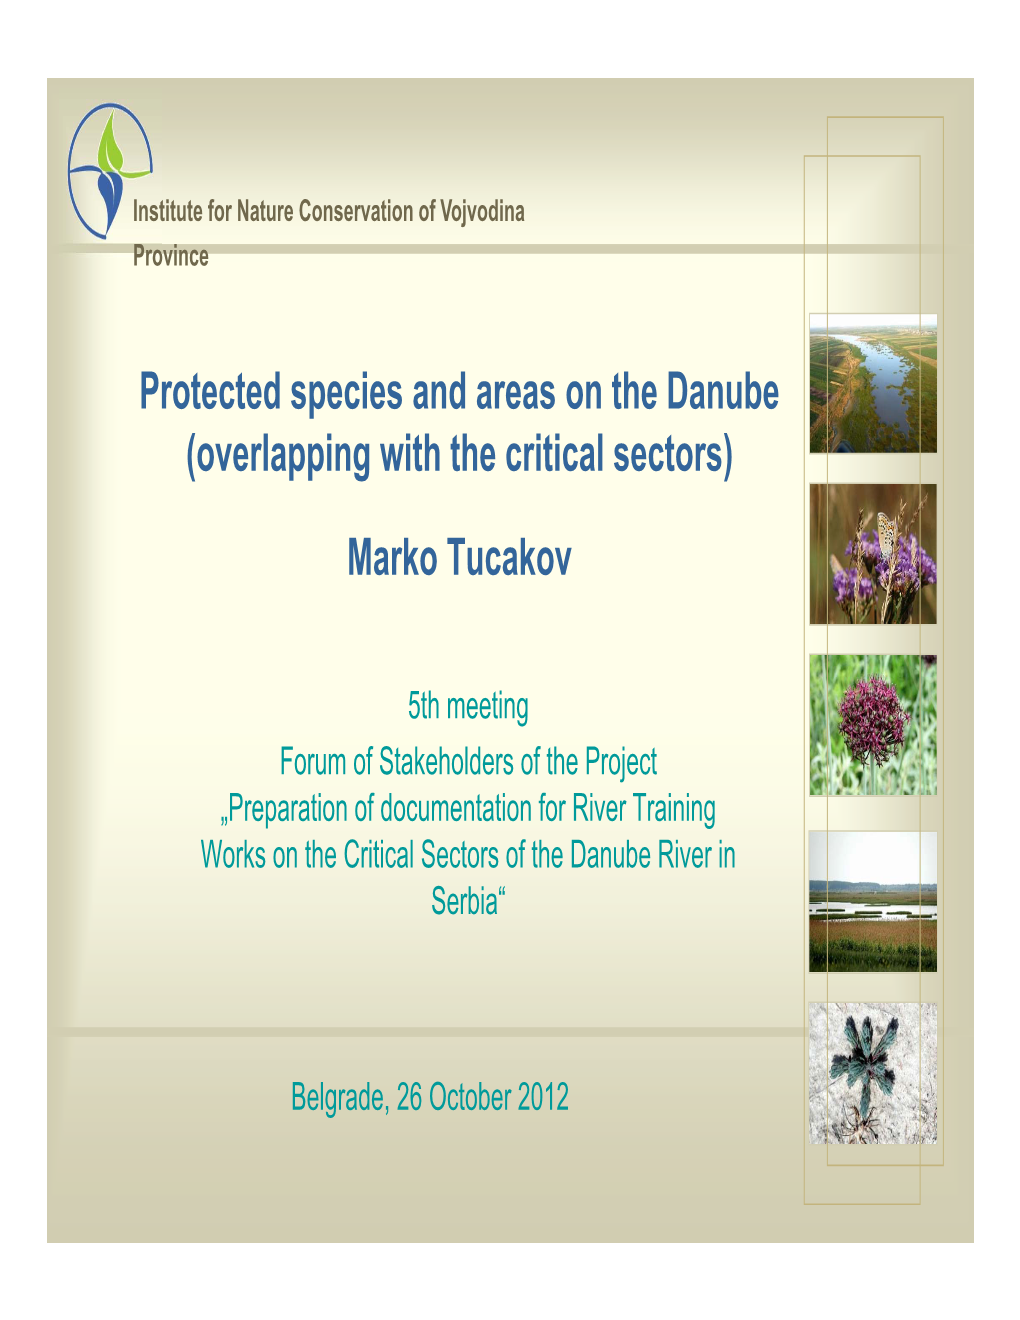 Protected Species and Areas on the Danube (Overlapping with the Critical Sectors)